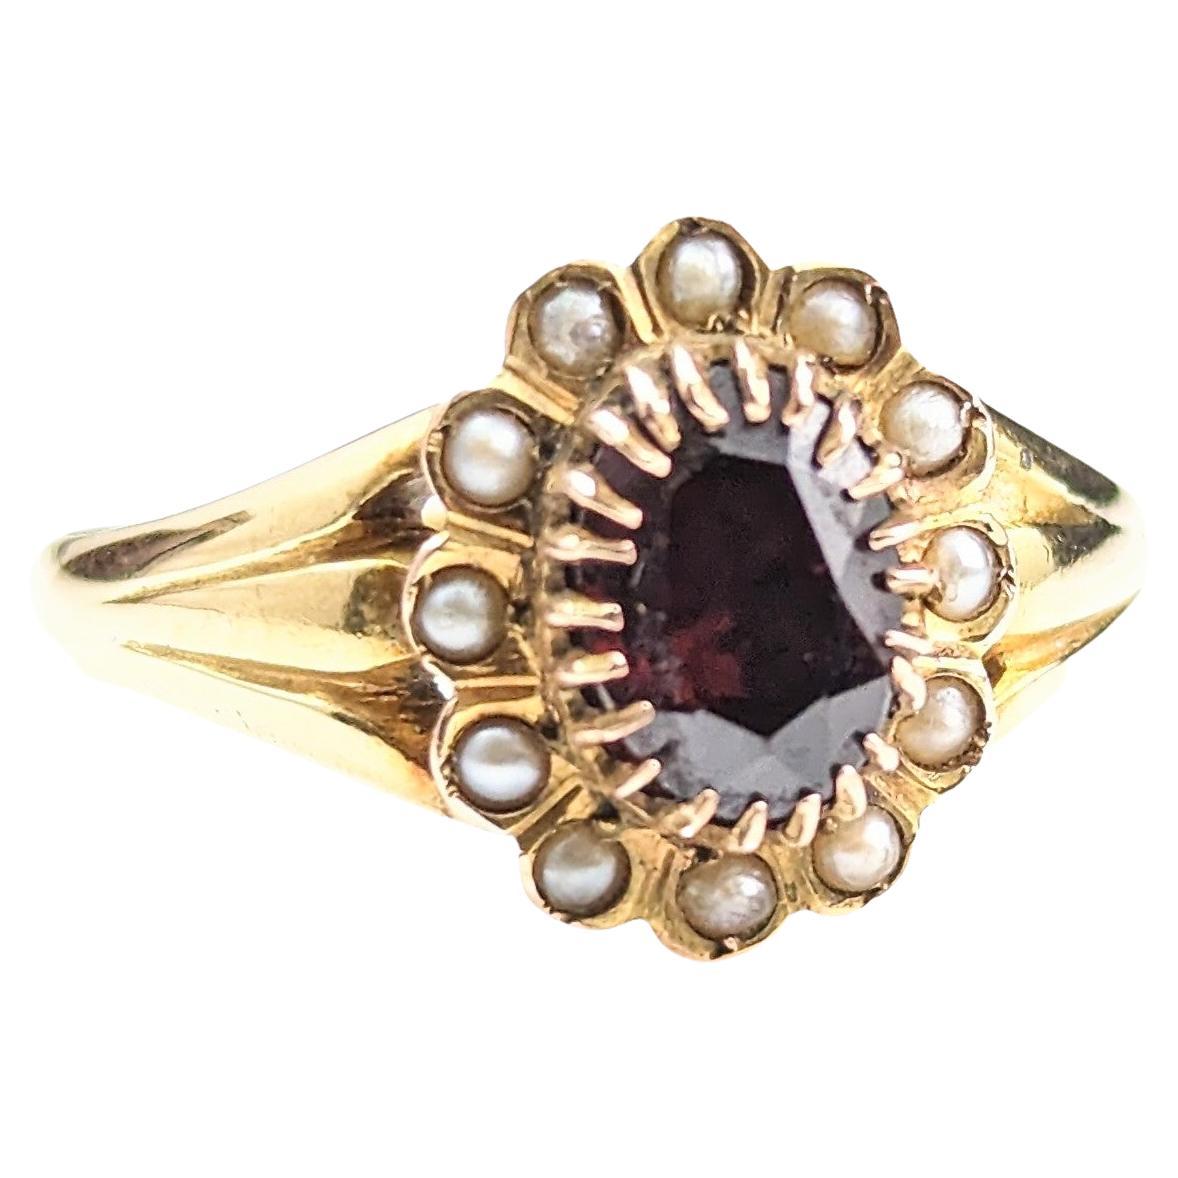 Antique Garnet and Pearl Cluster Ring, 18k Yellow Gold, Edwardian